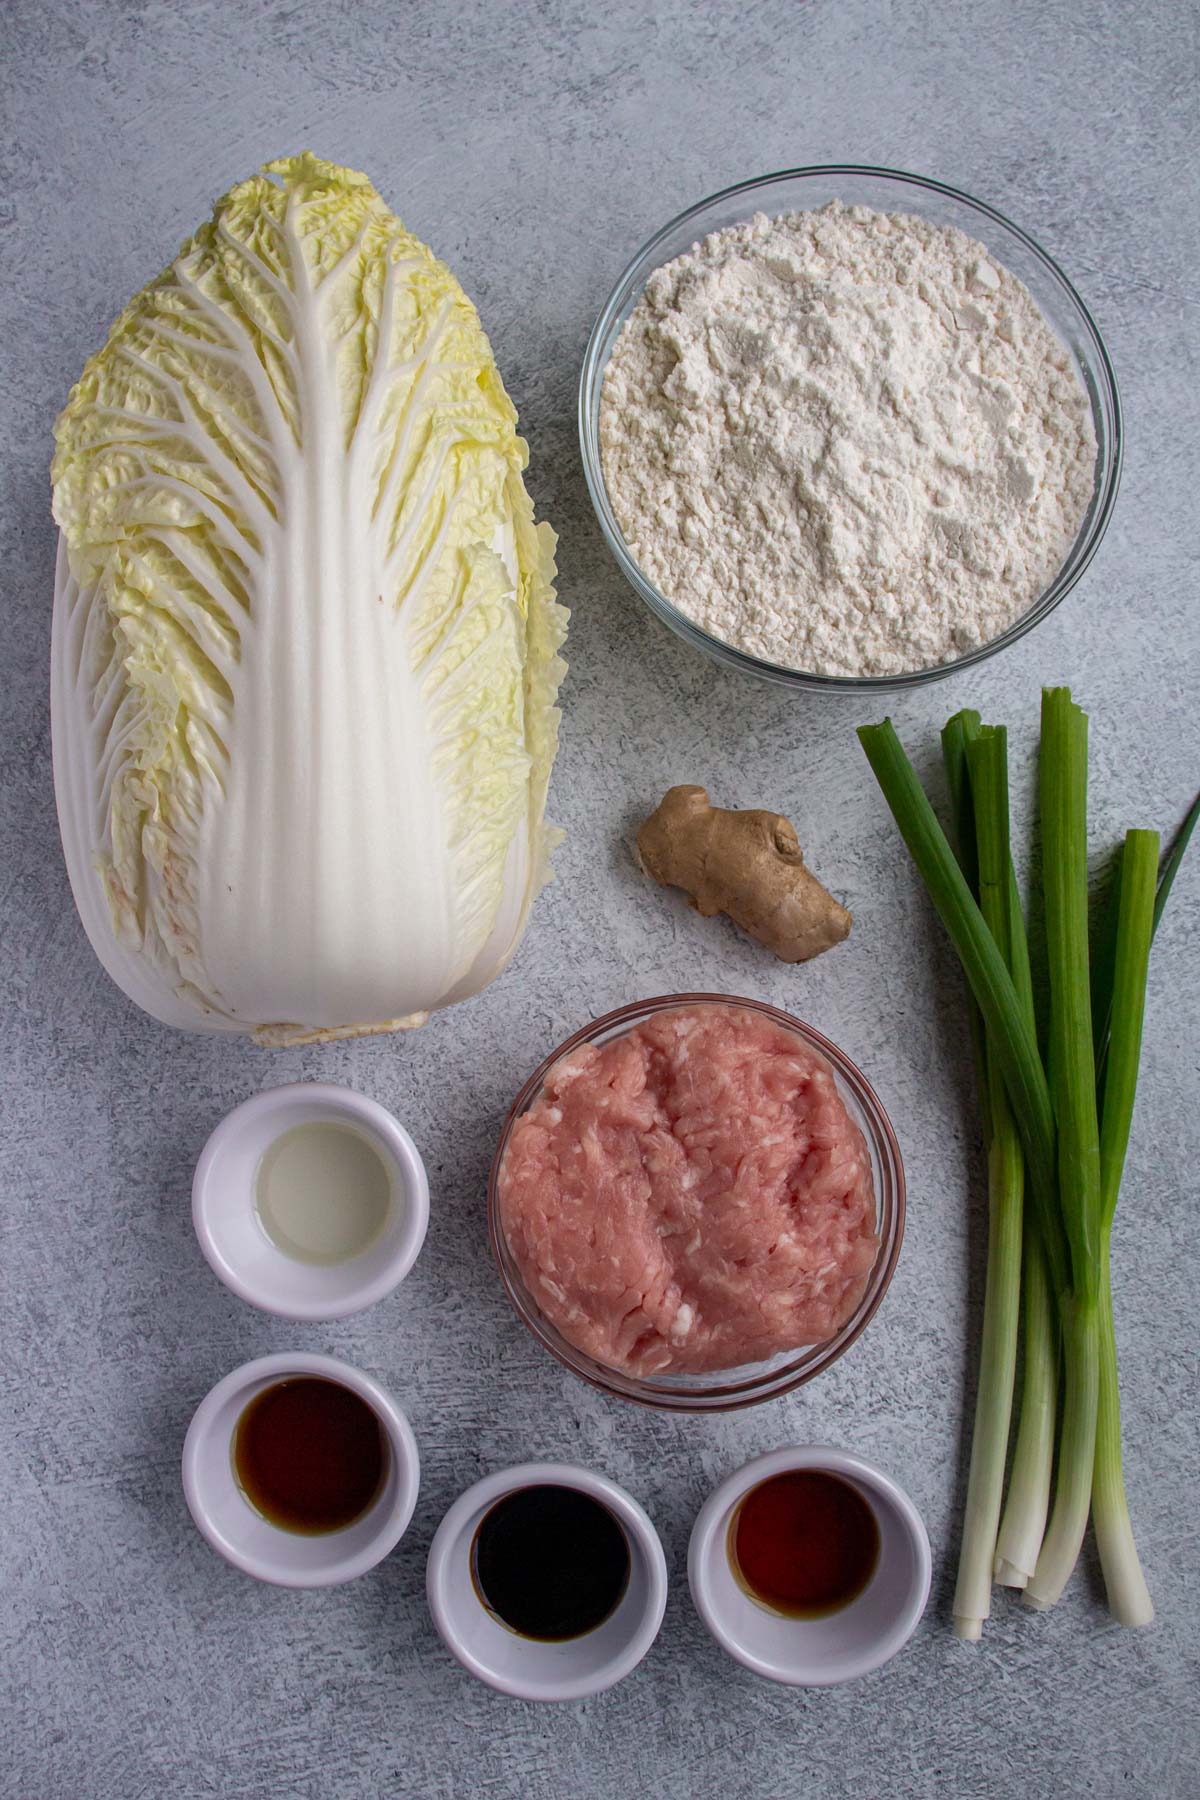 Ingredients for pork and cabbage dumplings on a light grey background.